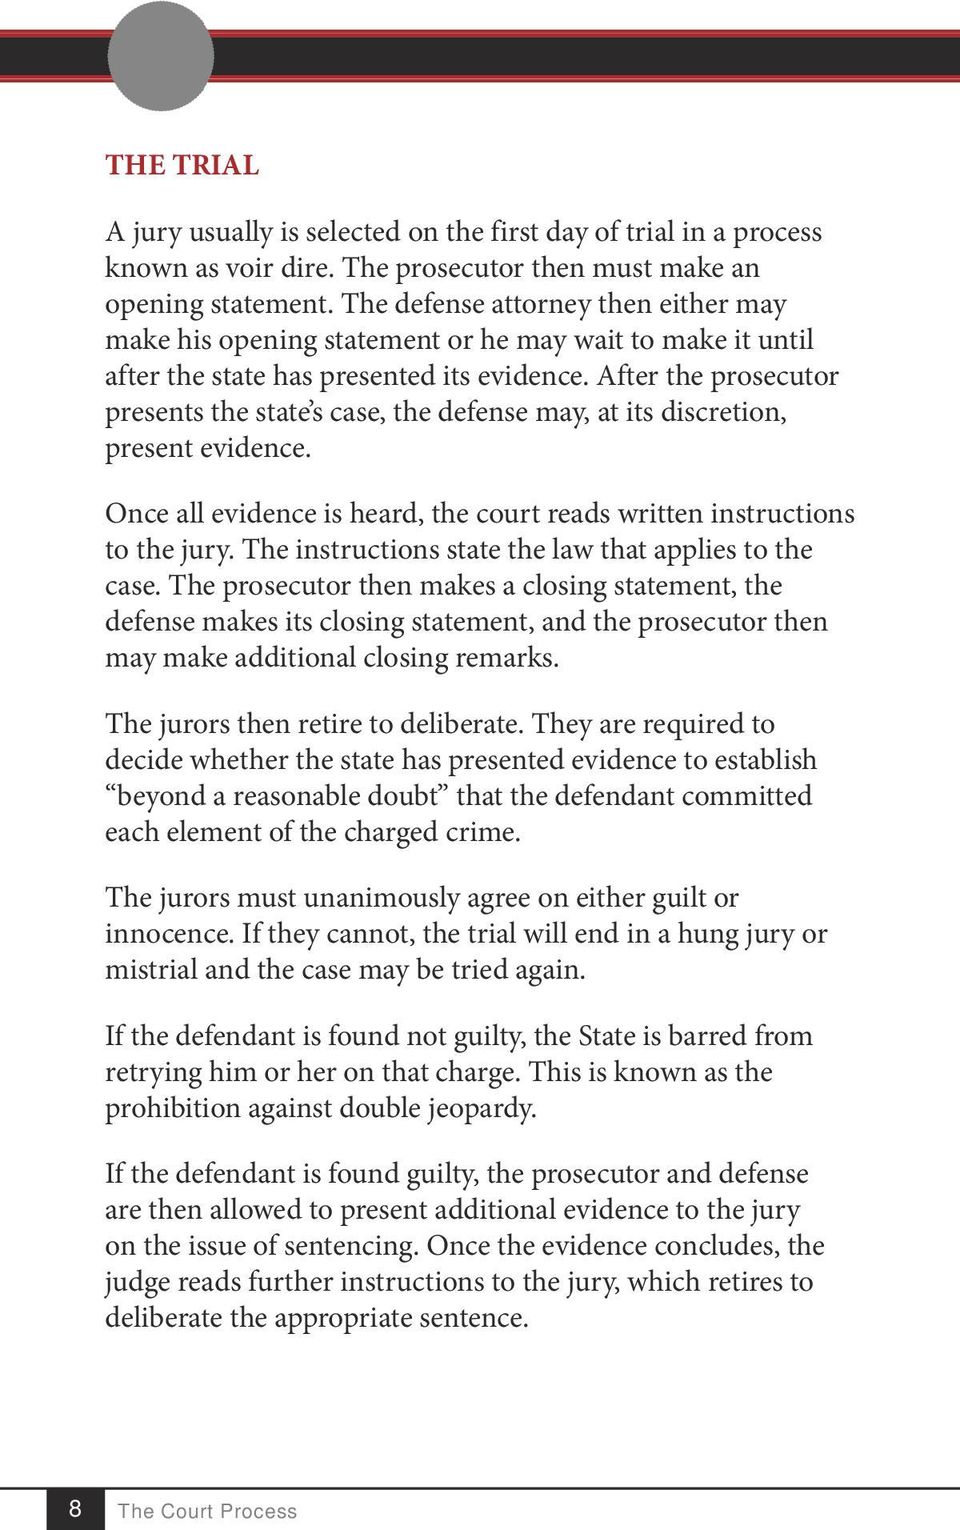 After the prosecutor presents the state s case, the defense may, at its discretion, present evidence. Once all evidence is heard, the court reads written instructions to the jury.